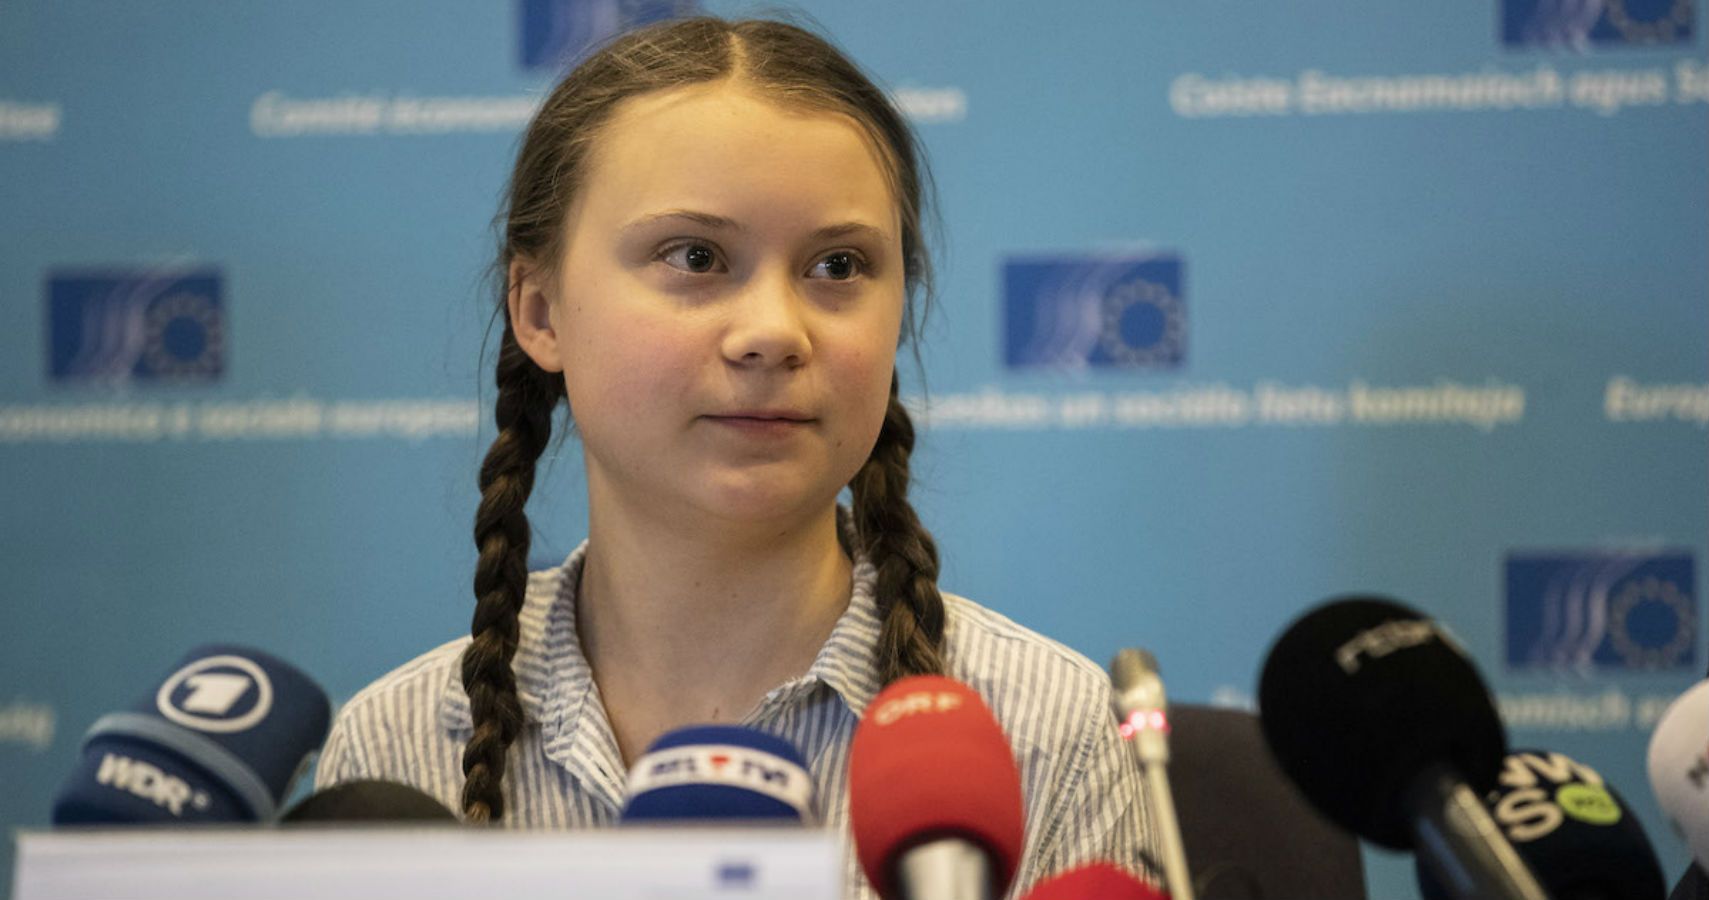 16-Year-Old Greta Thunberg Has Been Nominated For The Nobel Peace Prize